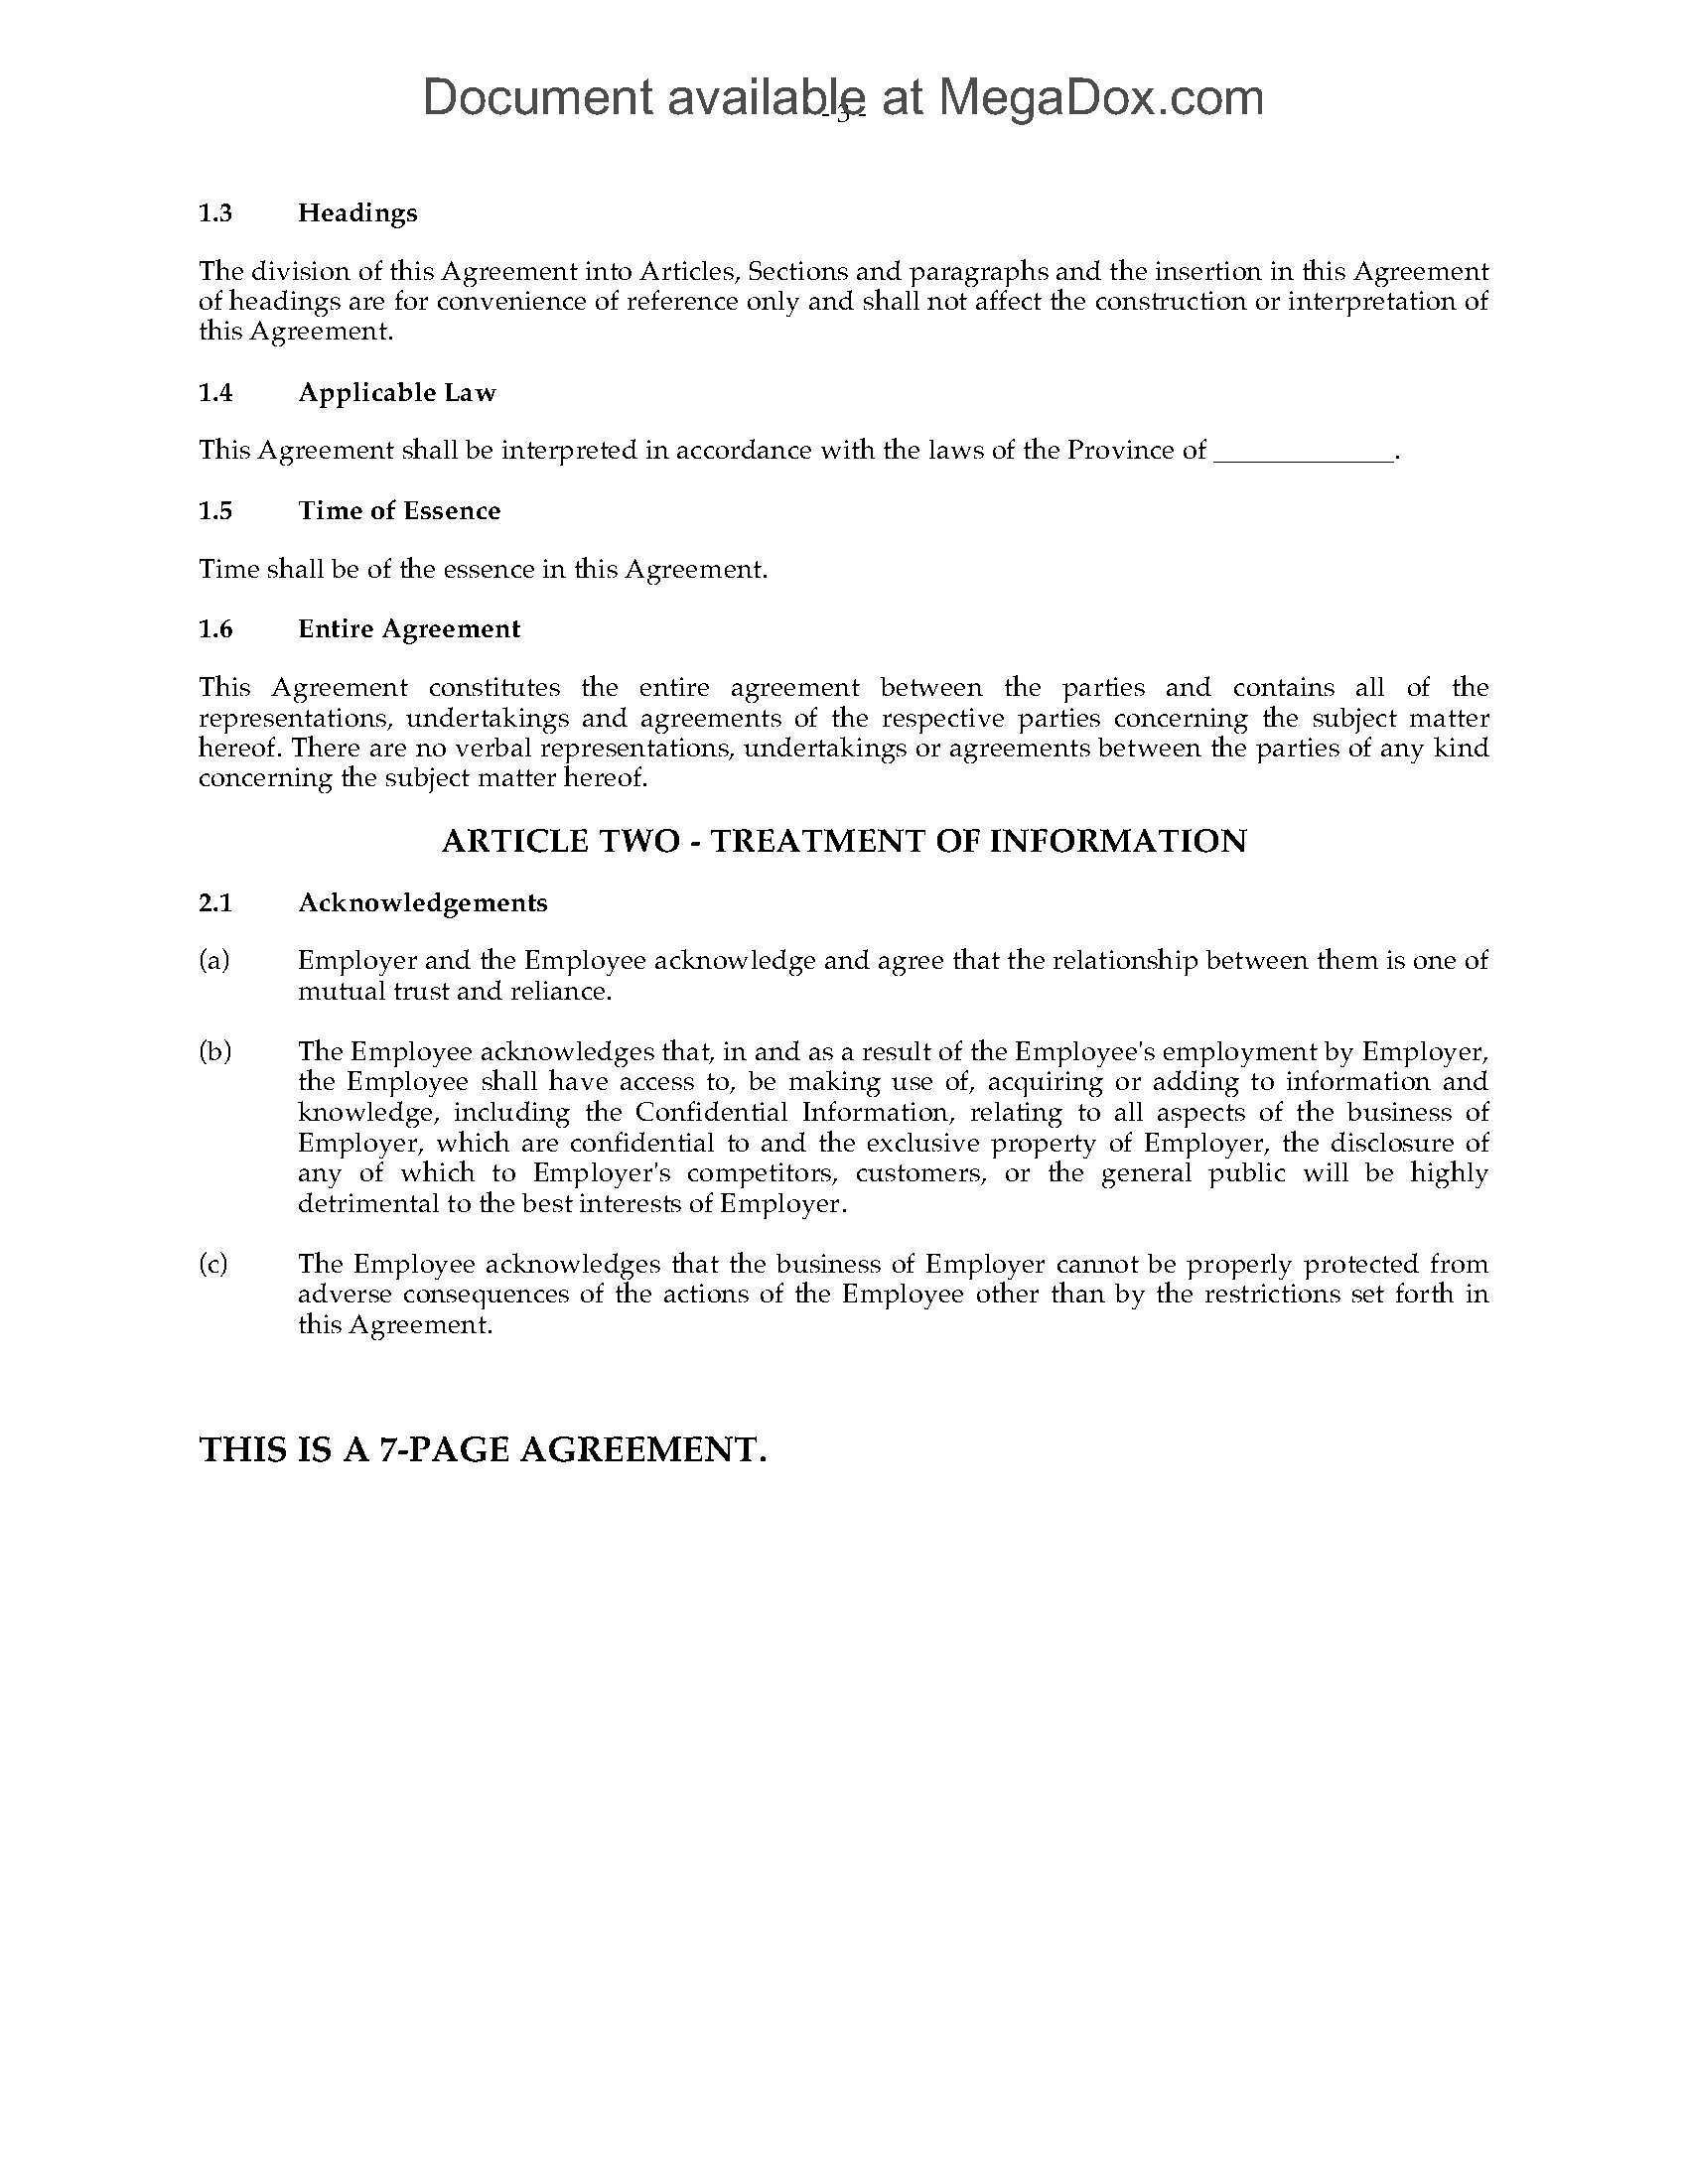 proprietary rights assignment agreement